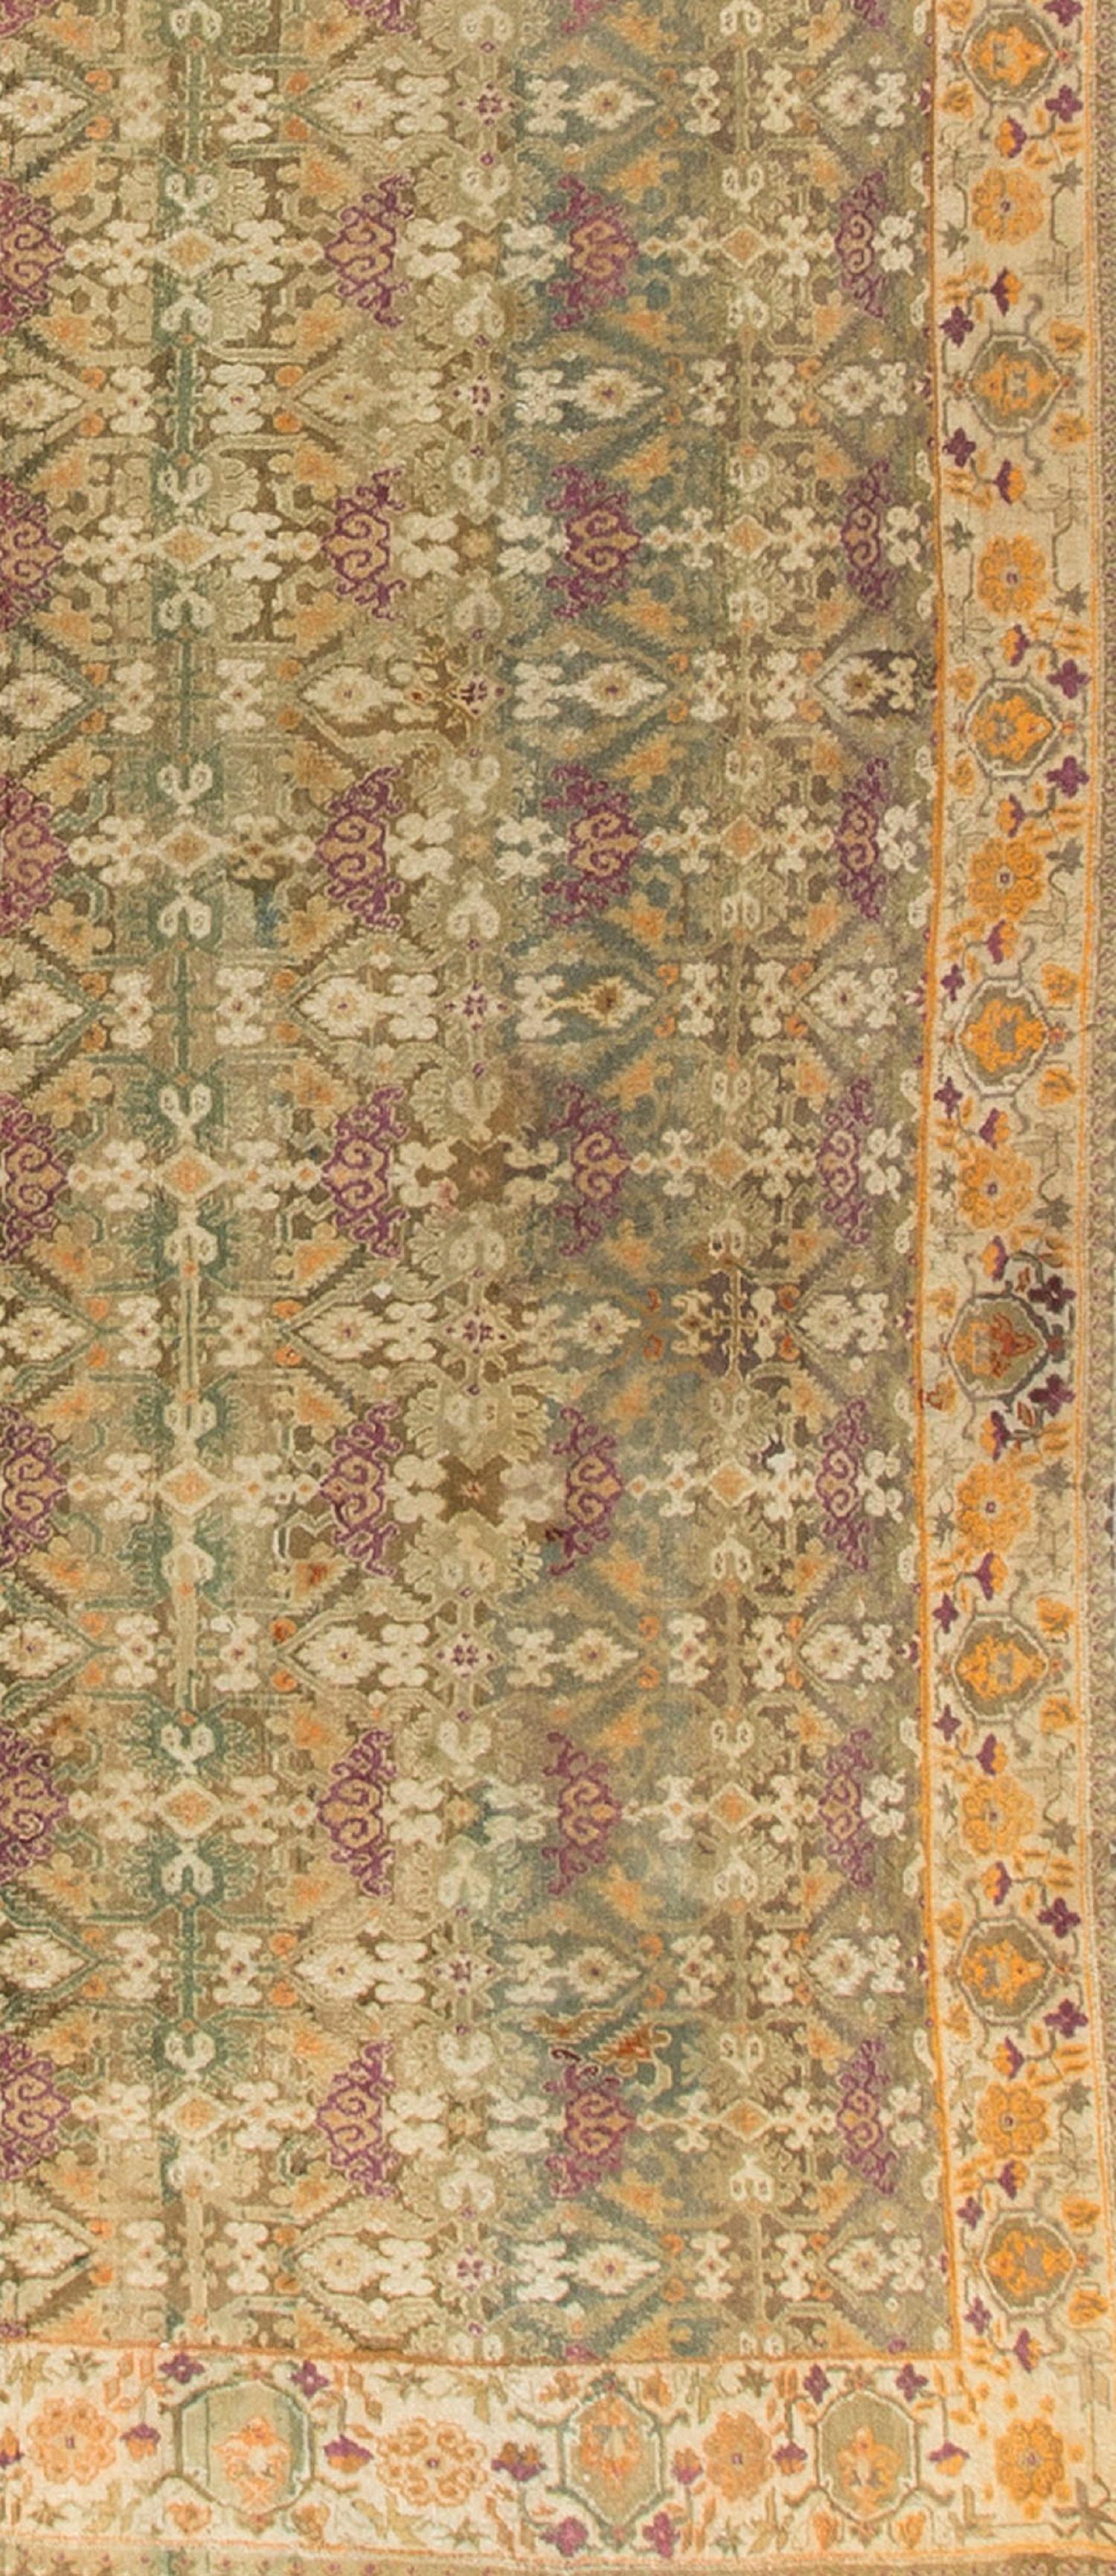 Hand-Woven Antique Indian Agra Rug, circa 1890 8' x 16'10 For Sale